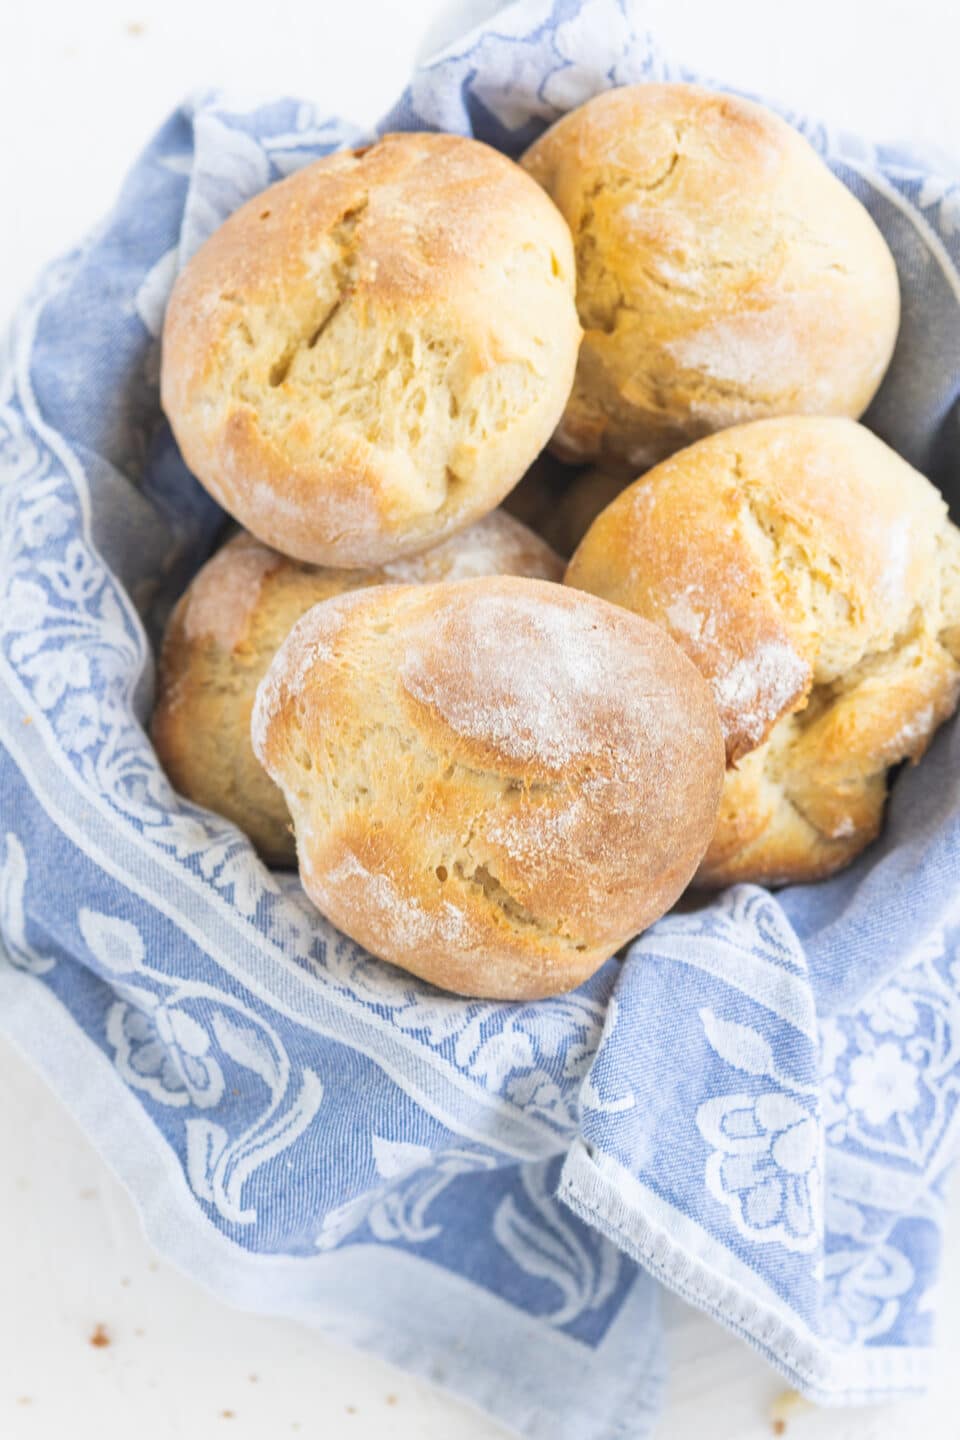 buns with potatoes and spelt flour